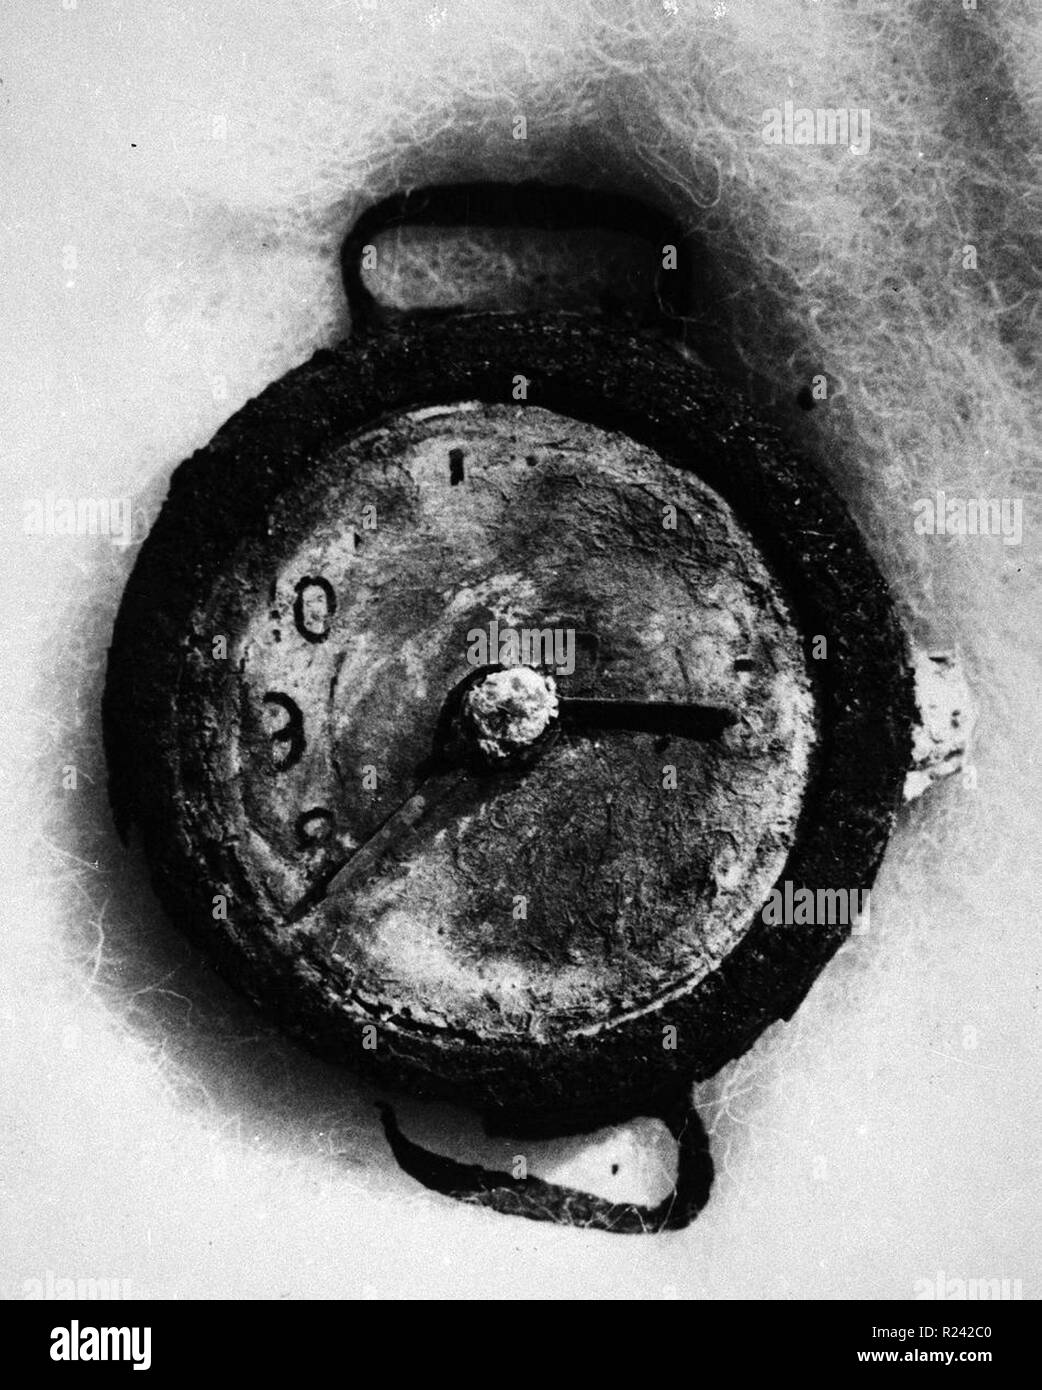 A watch stopped at 08:15 AM found in the wreckage of Hiroshima, Japan after the atomic bomb was dropped in World War Two Stock Photo